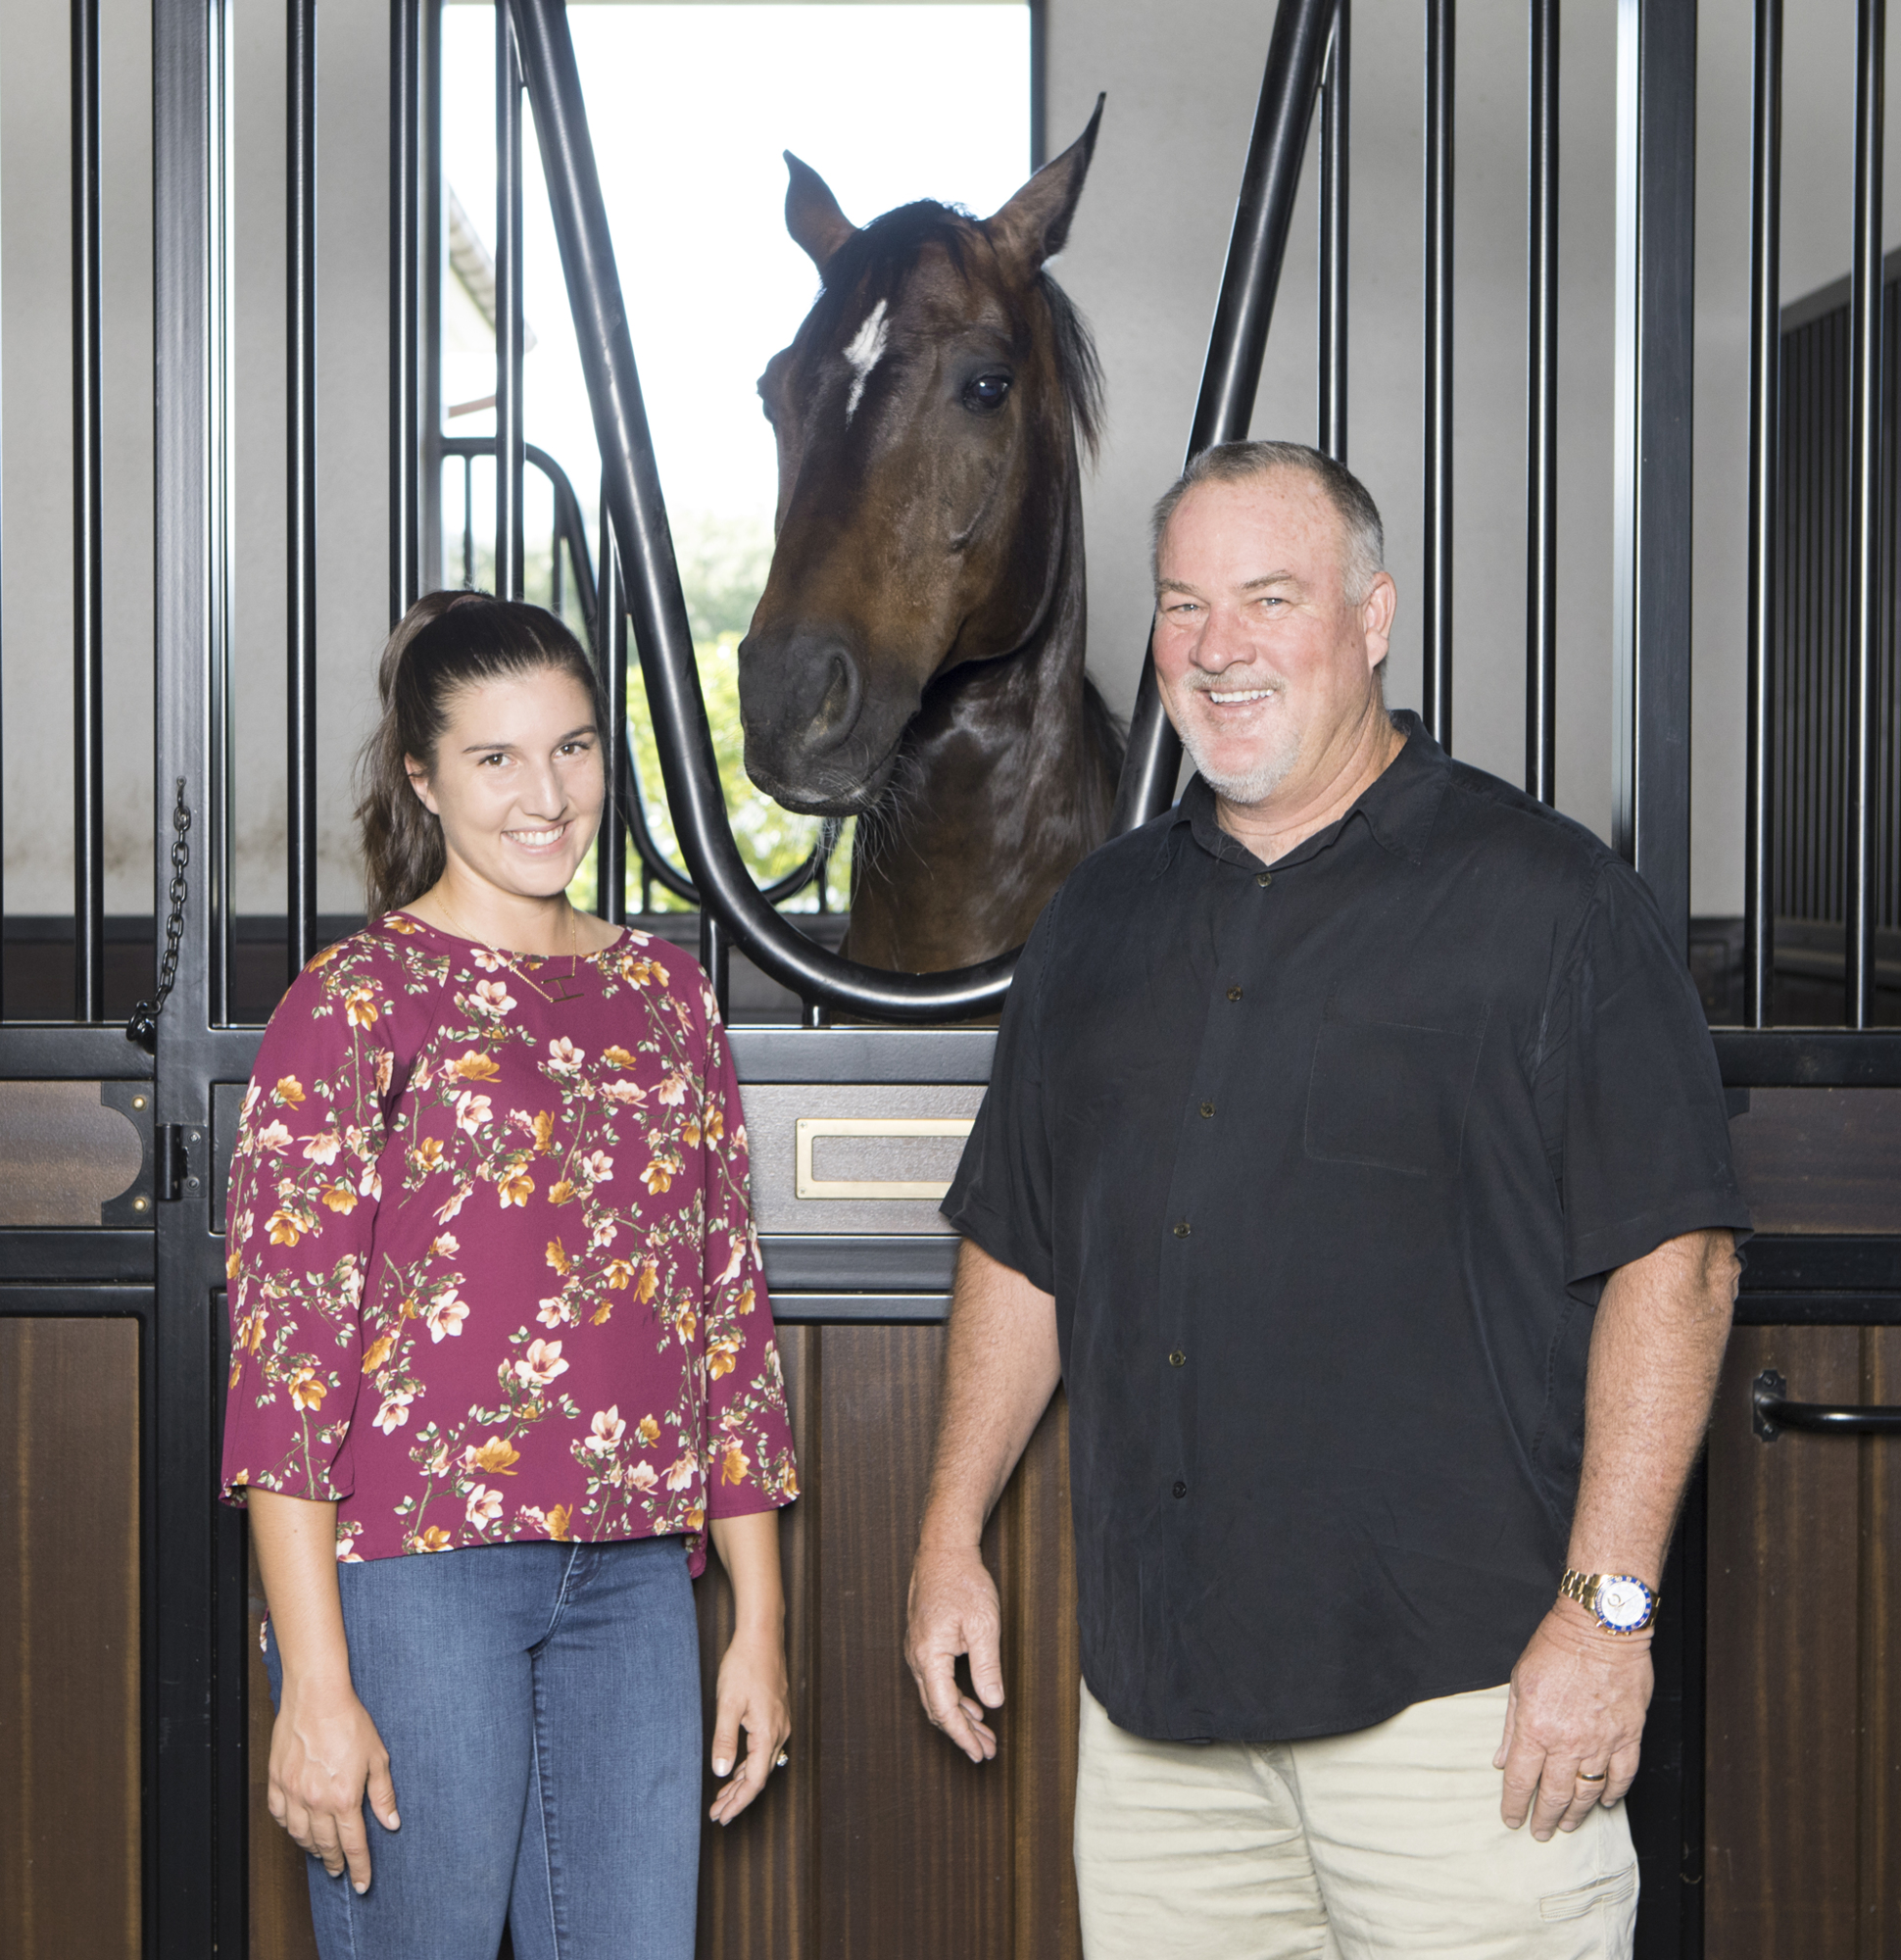 Mark Wemple. Steve Herrig and his daughter Hannah Herrig Ketelboeter are building TerraNova Equestrian Center and TerraNova Estates on more than 1,200 acres in east Manatee County.